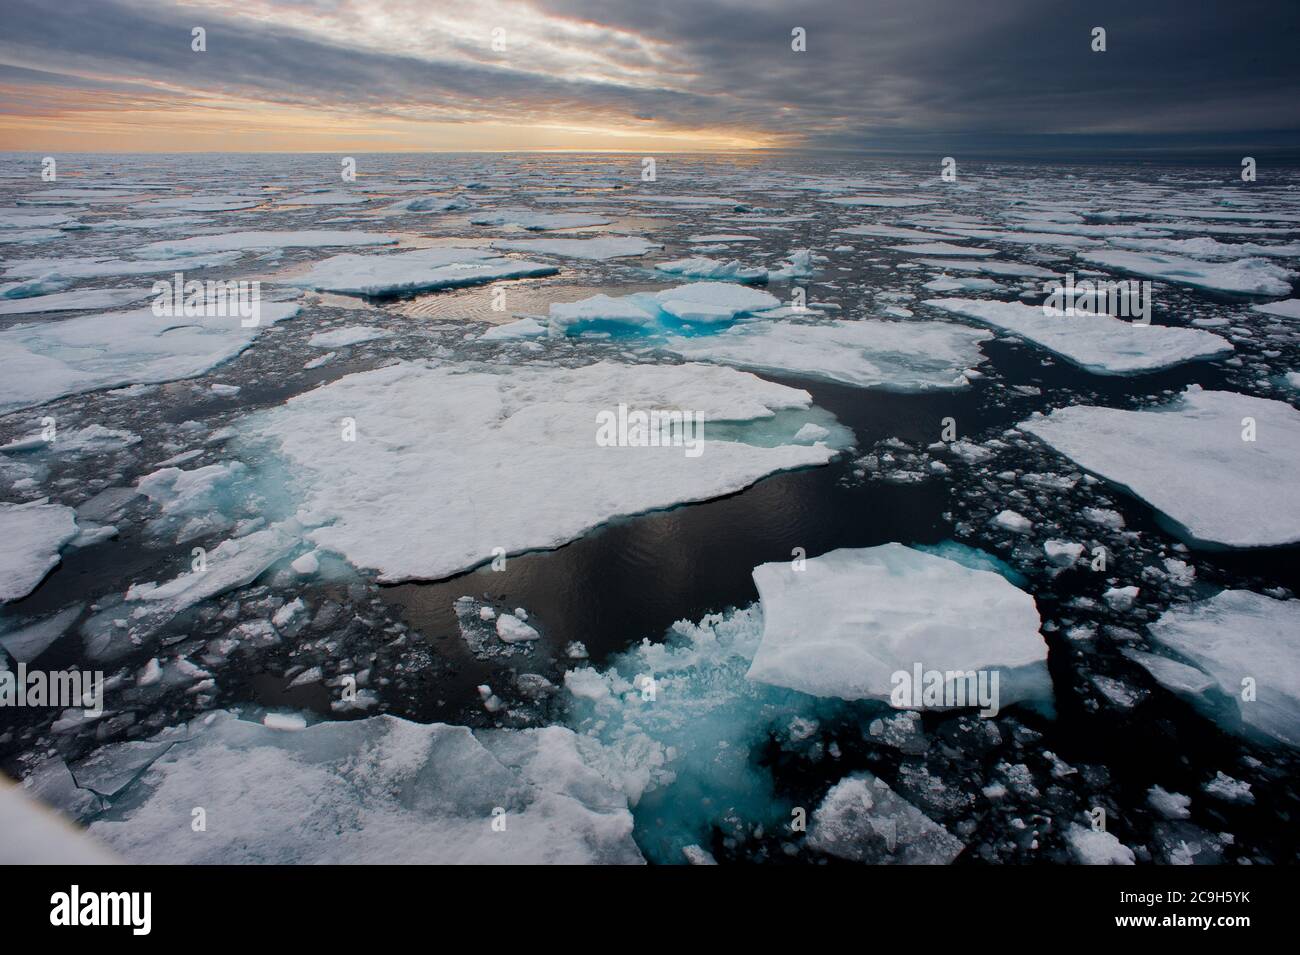 Northern arctic ice floes are seen breaking up in this wide angle view with sun setting on horizon.Taken from ship at sea. Stock Photo